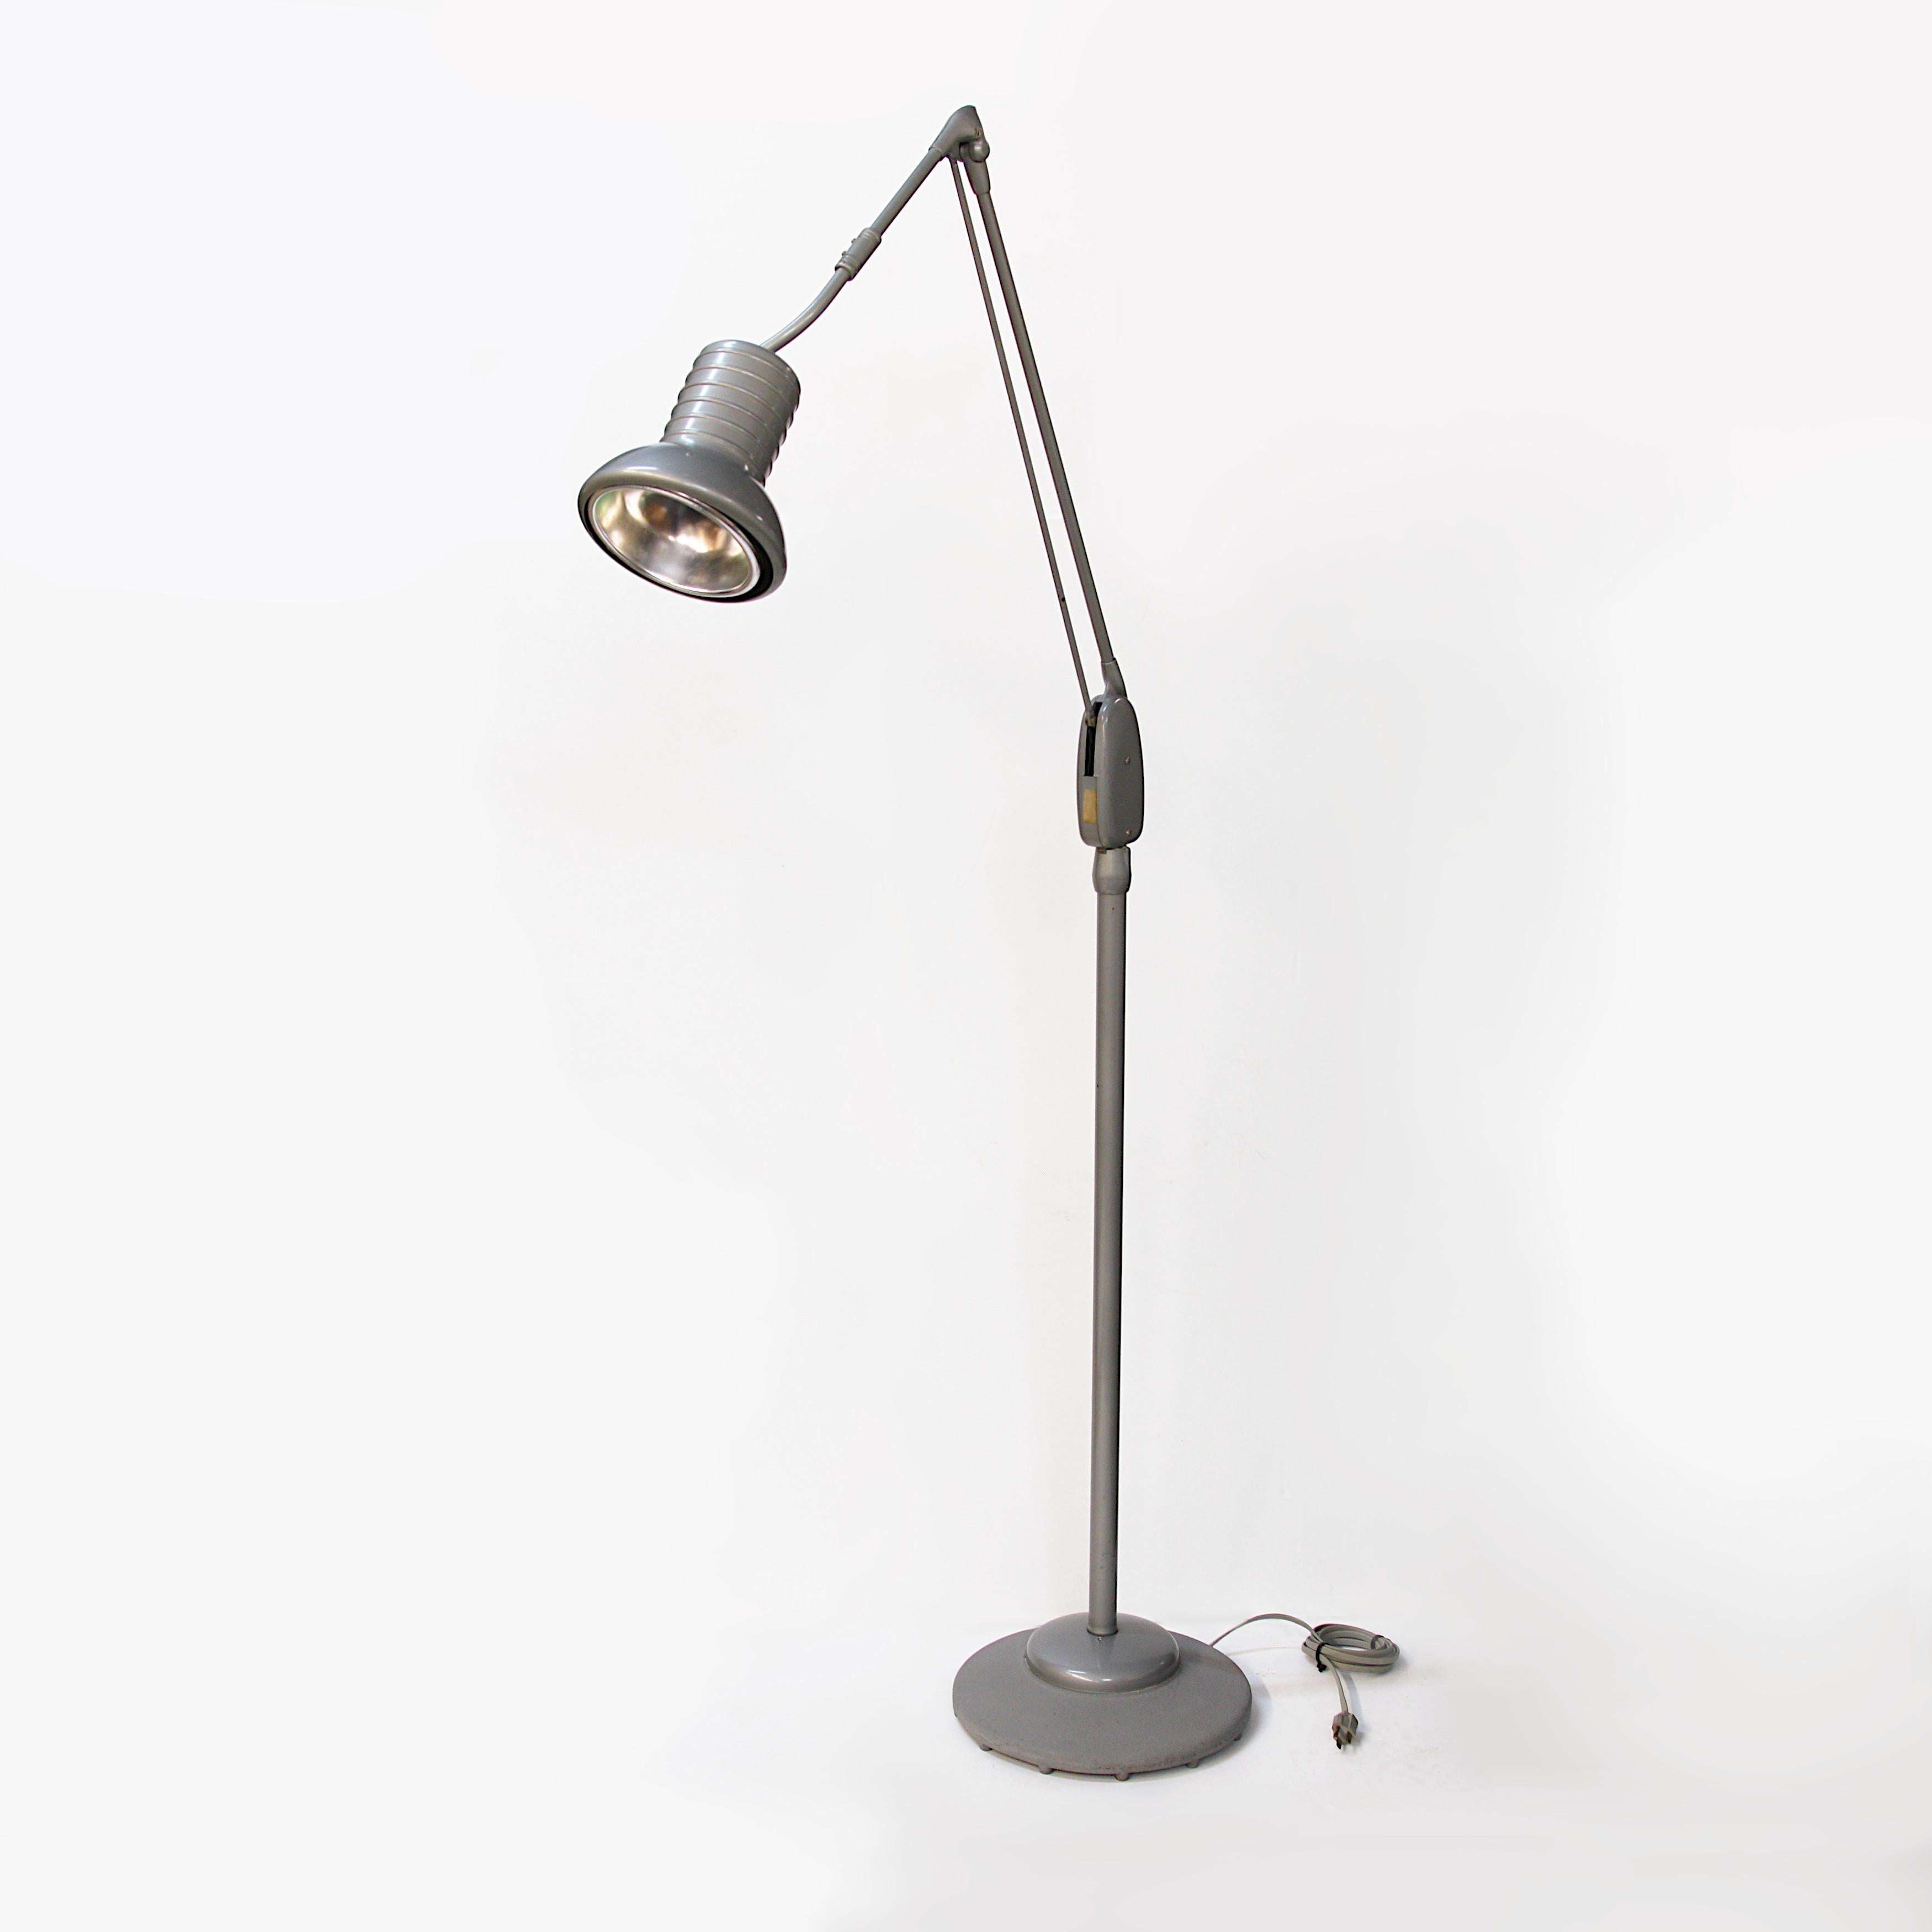 This lamp is a rare piece of Mid-Century Modern Industrial Design and features the hard-to-find, original gray/silver paint that really sets off the form beautifully. However, this lamp has function to match its form with a weighted base and